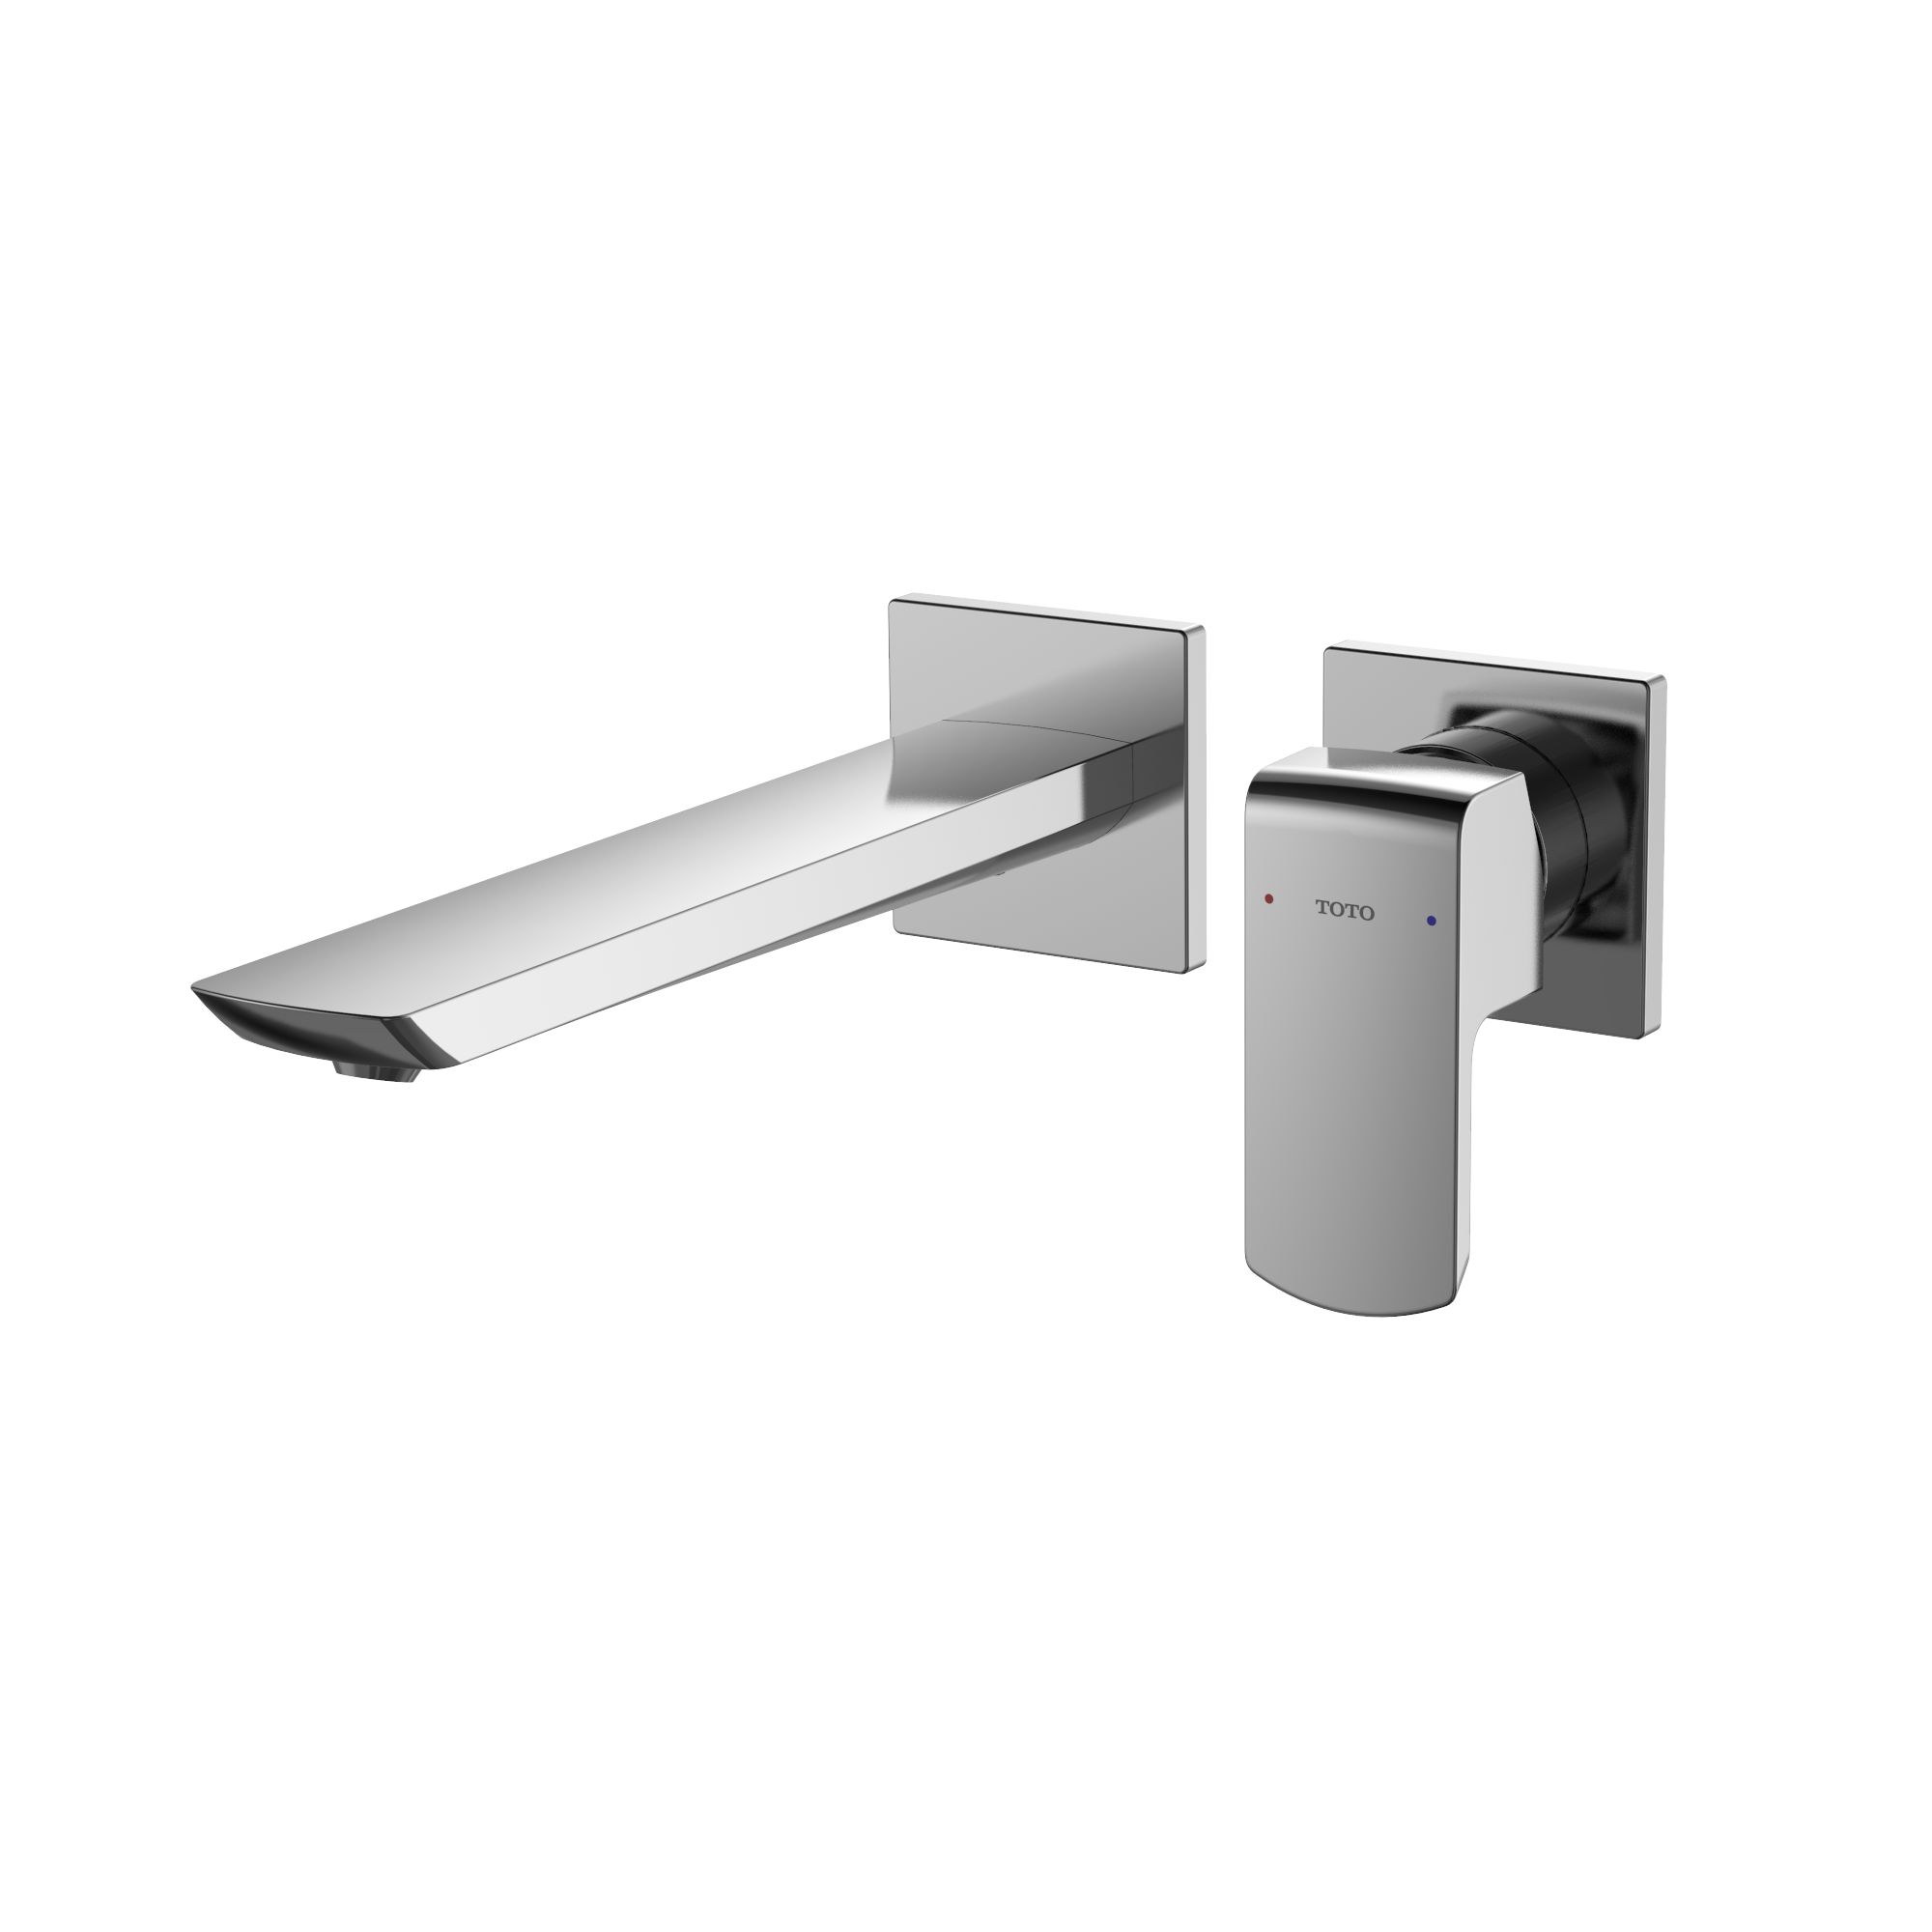 GR Wall-Mount Faucet - 1.2 GPM